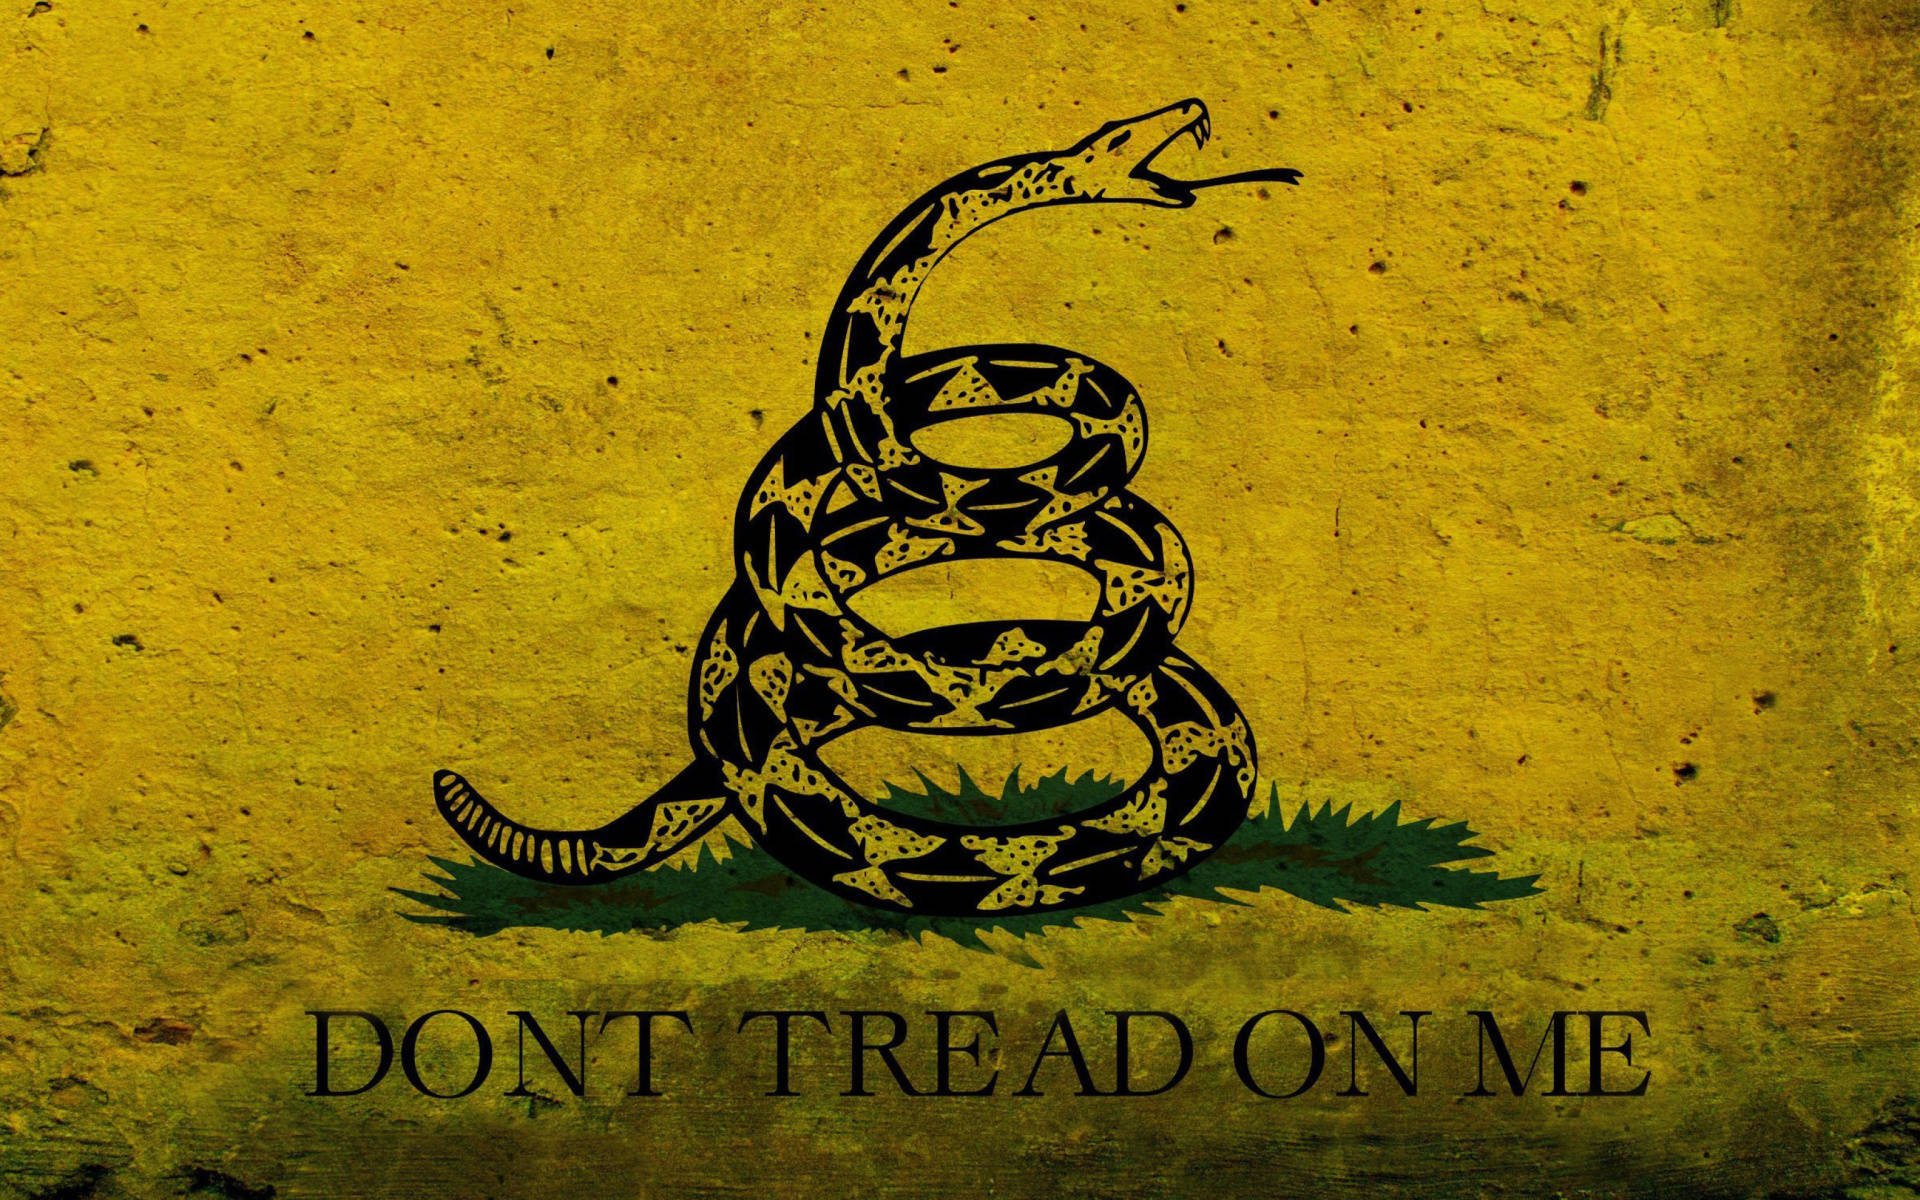 Dont tread on me 1080P 2K 4K 5K HD wallpapers free download  Wallpaper  Flare